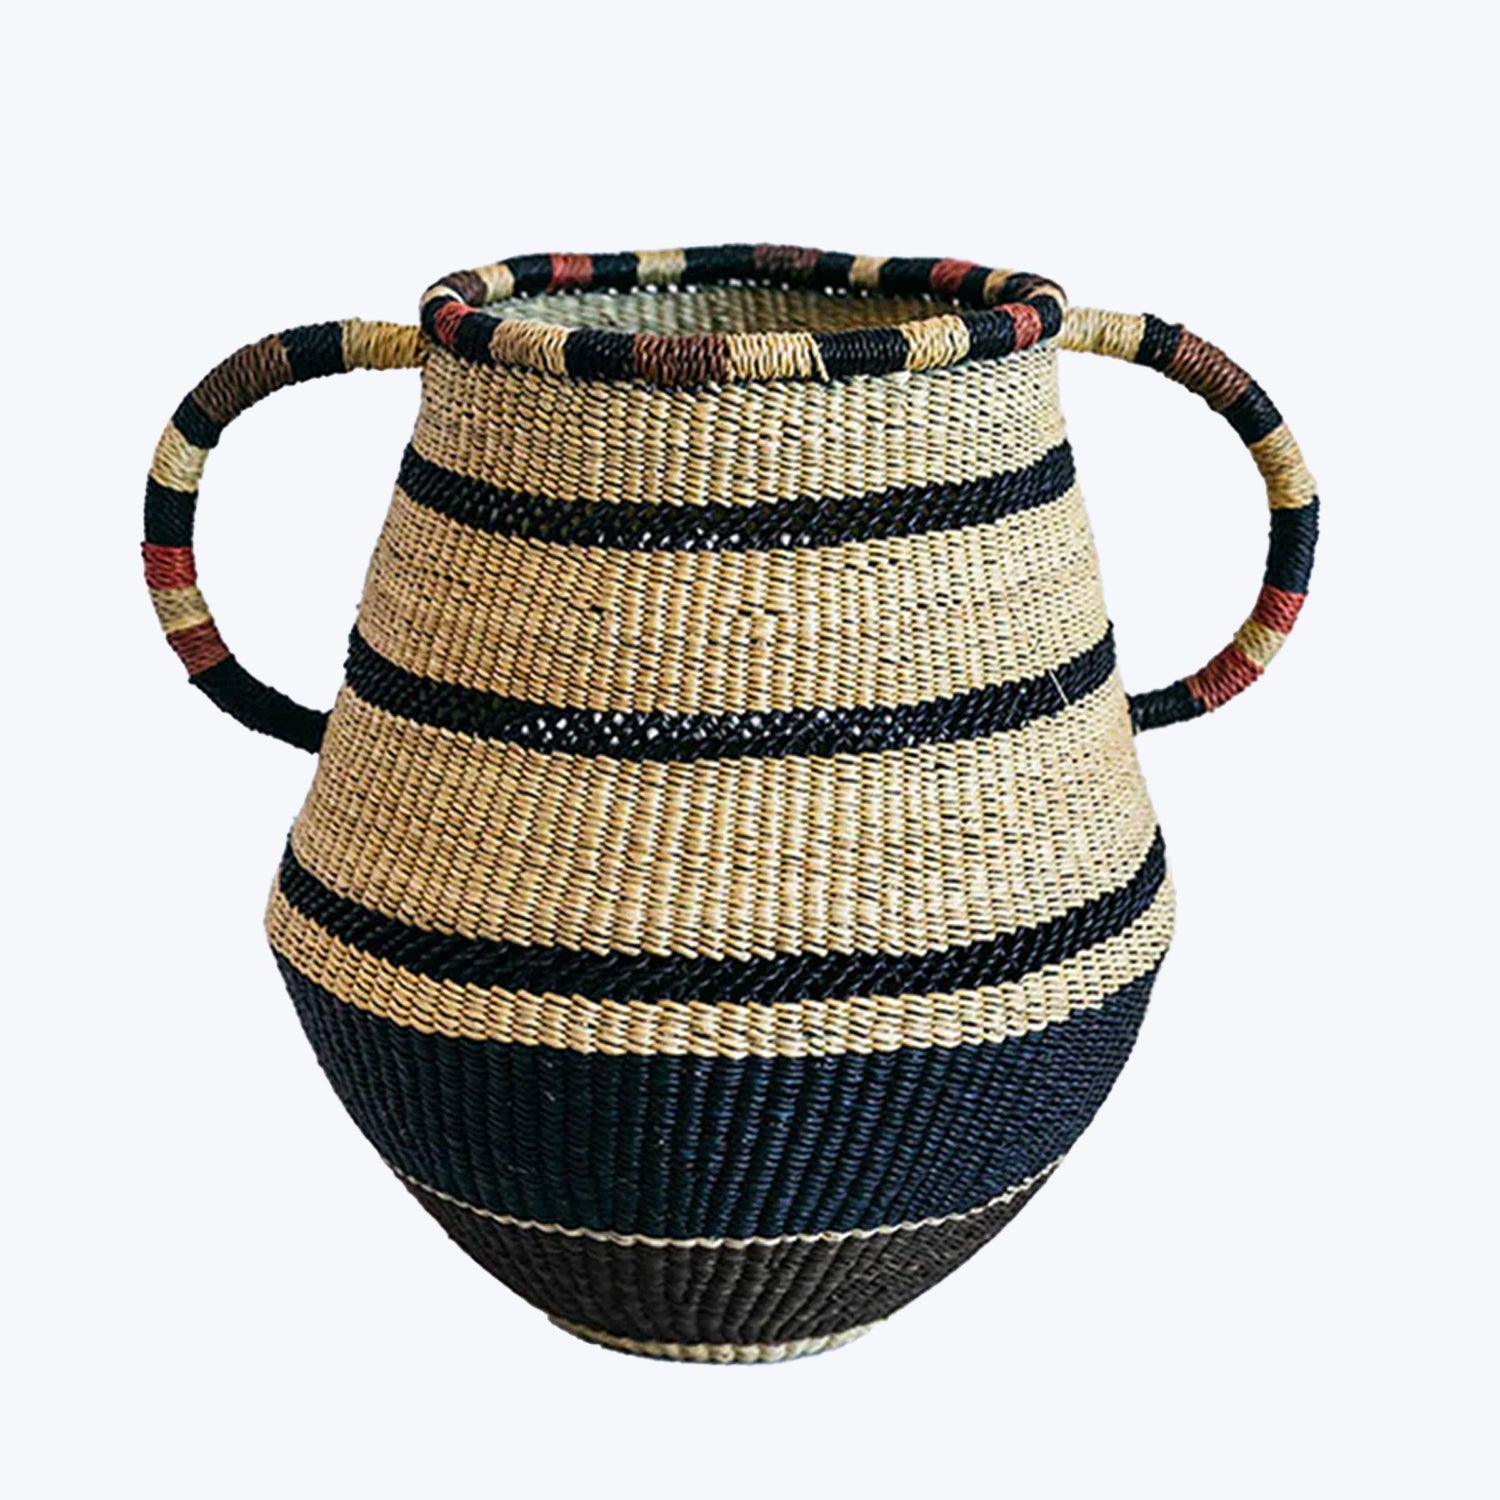 High-quality woven basket resembling a vase, adorned with colorful patterns.